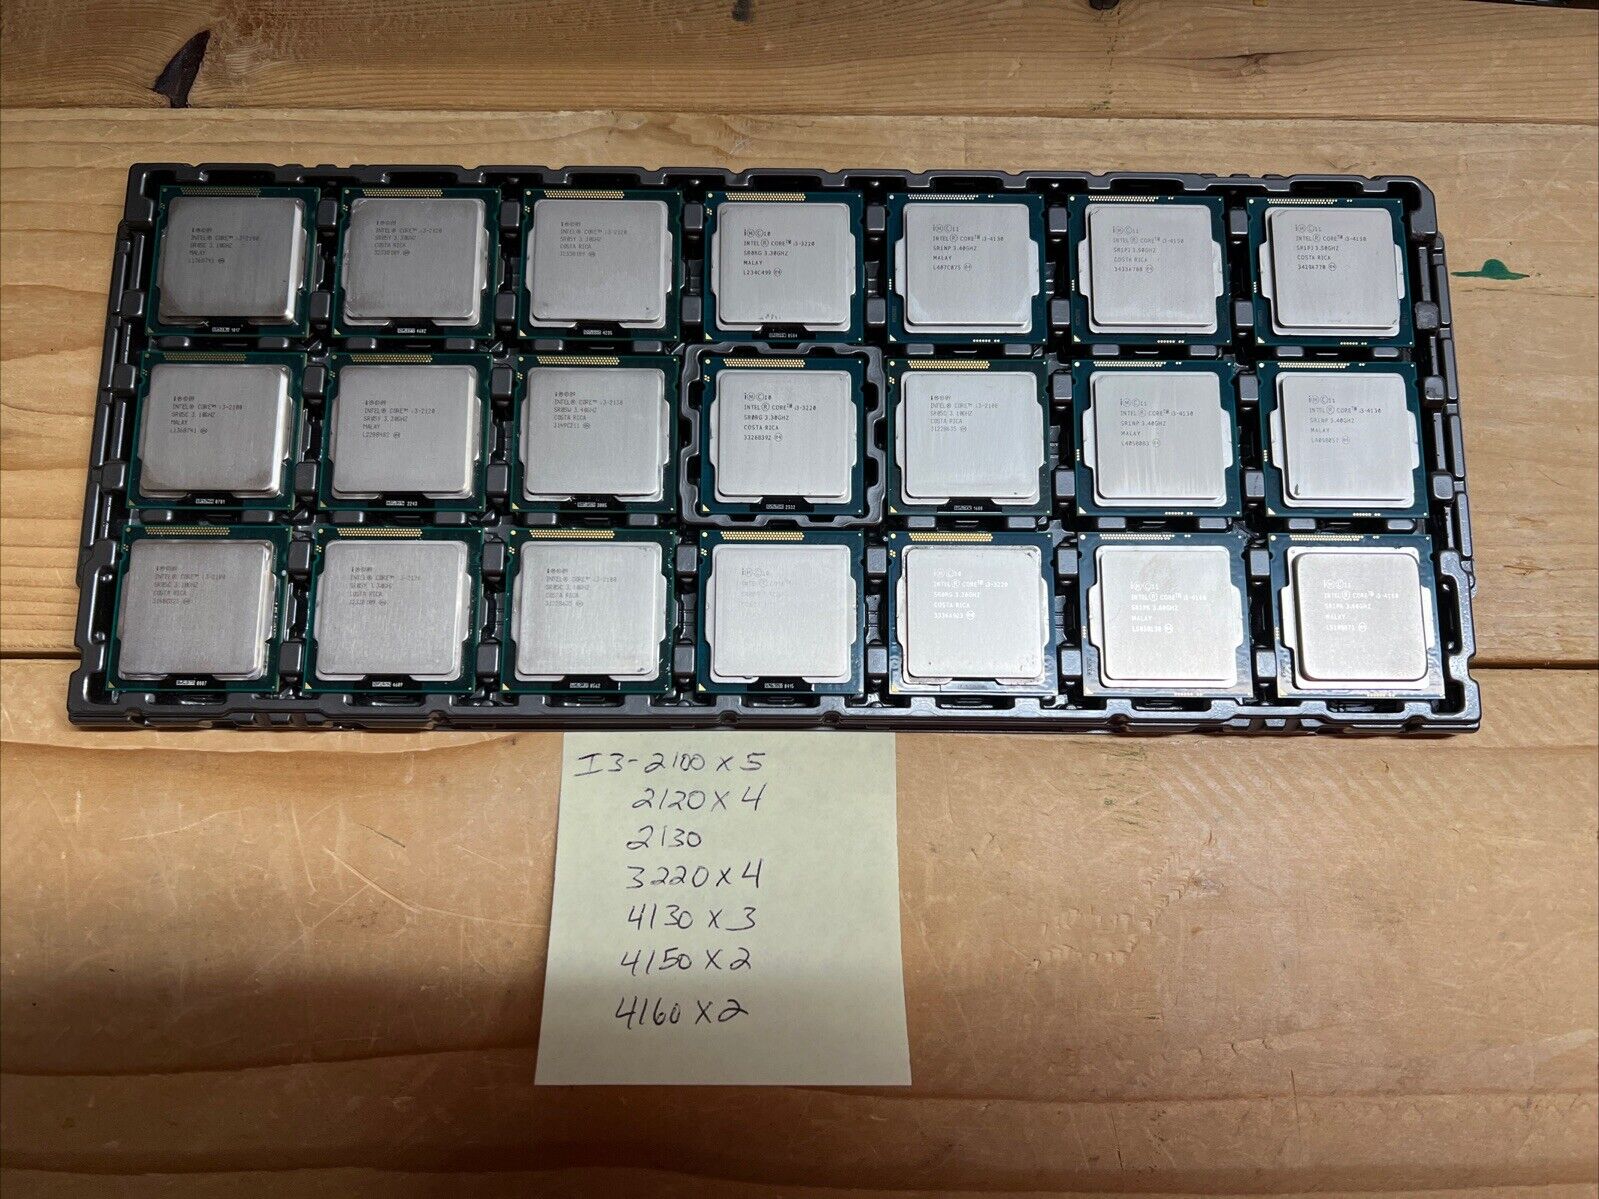 Lot of CPUs- Intel Core i3 - 2th, 3th, 4th Gen Qty 21 Total